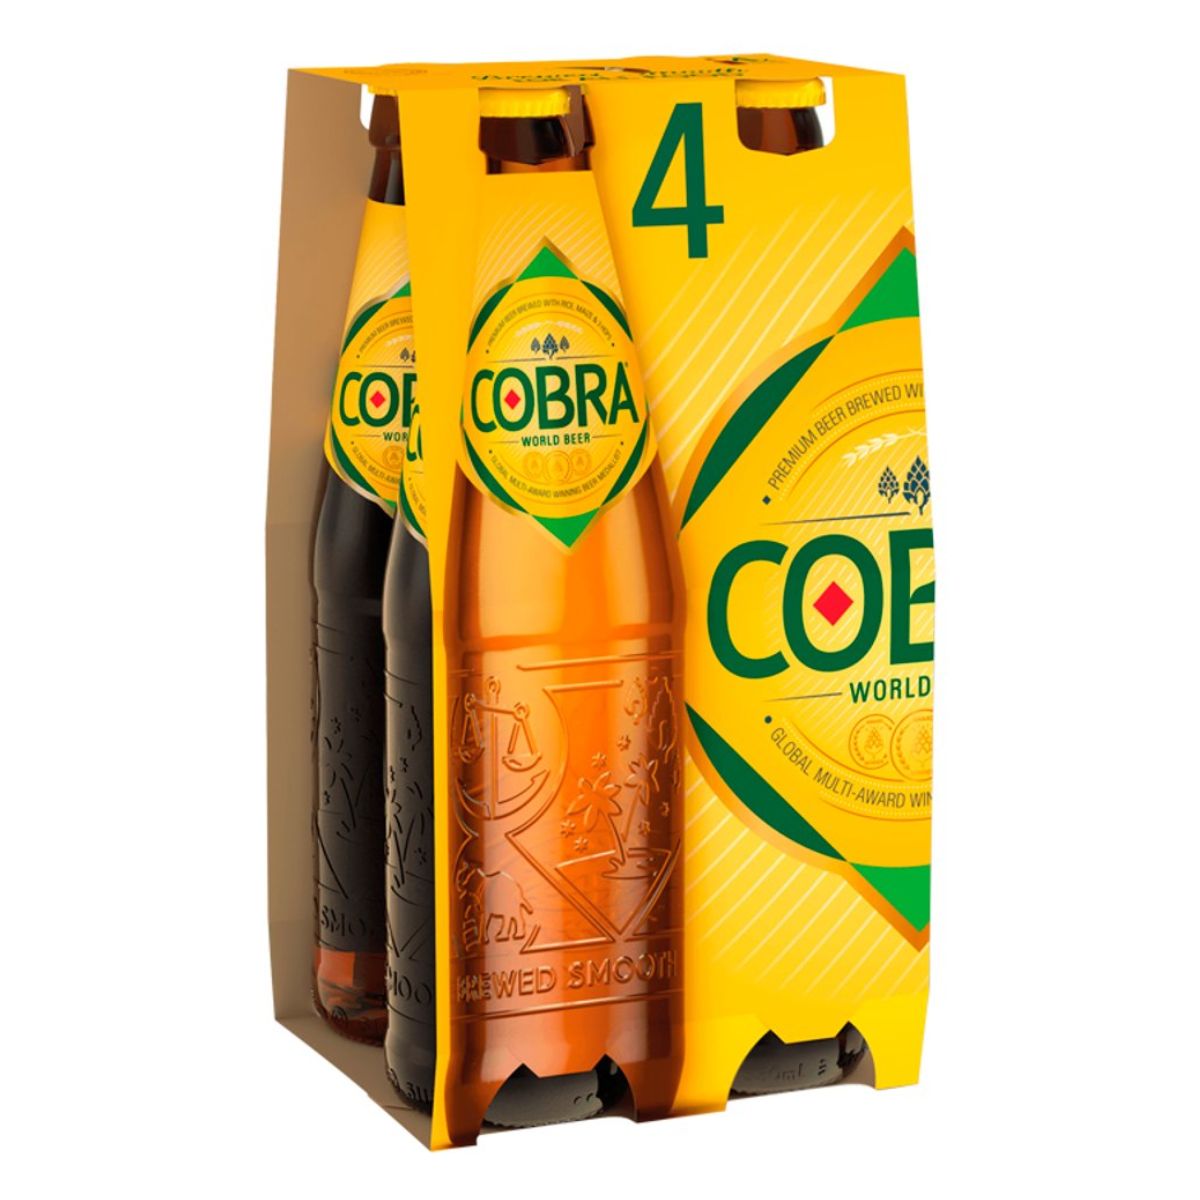 Four bottles of Cobra - Premium Beer (4.5% ABV) - 4 x 330ml in a box on a white background.